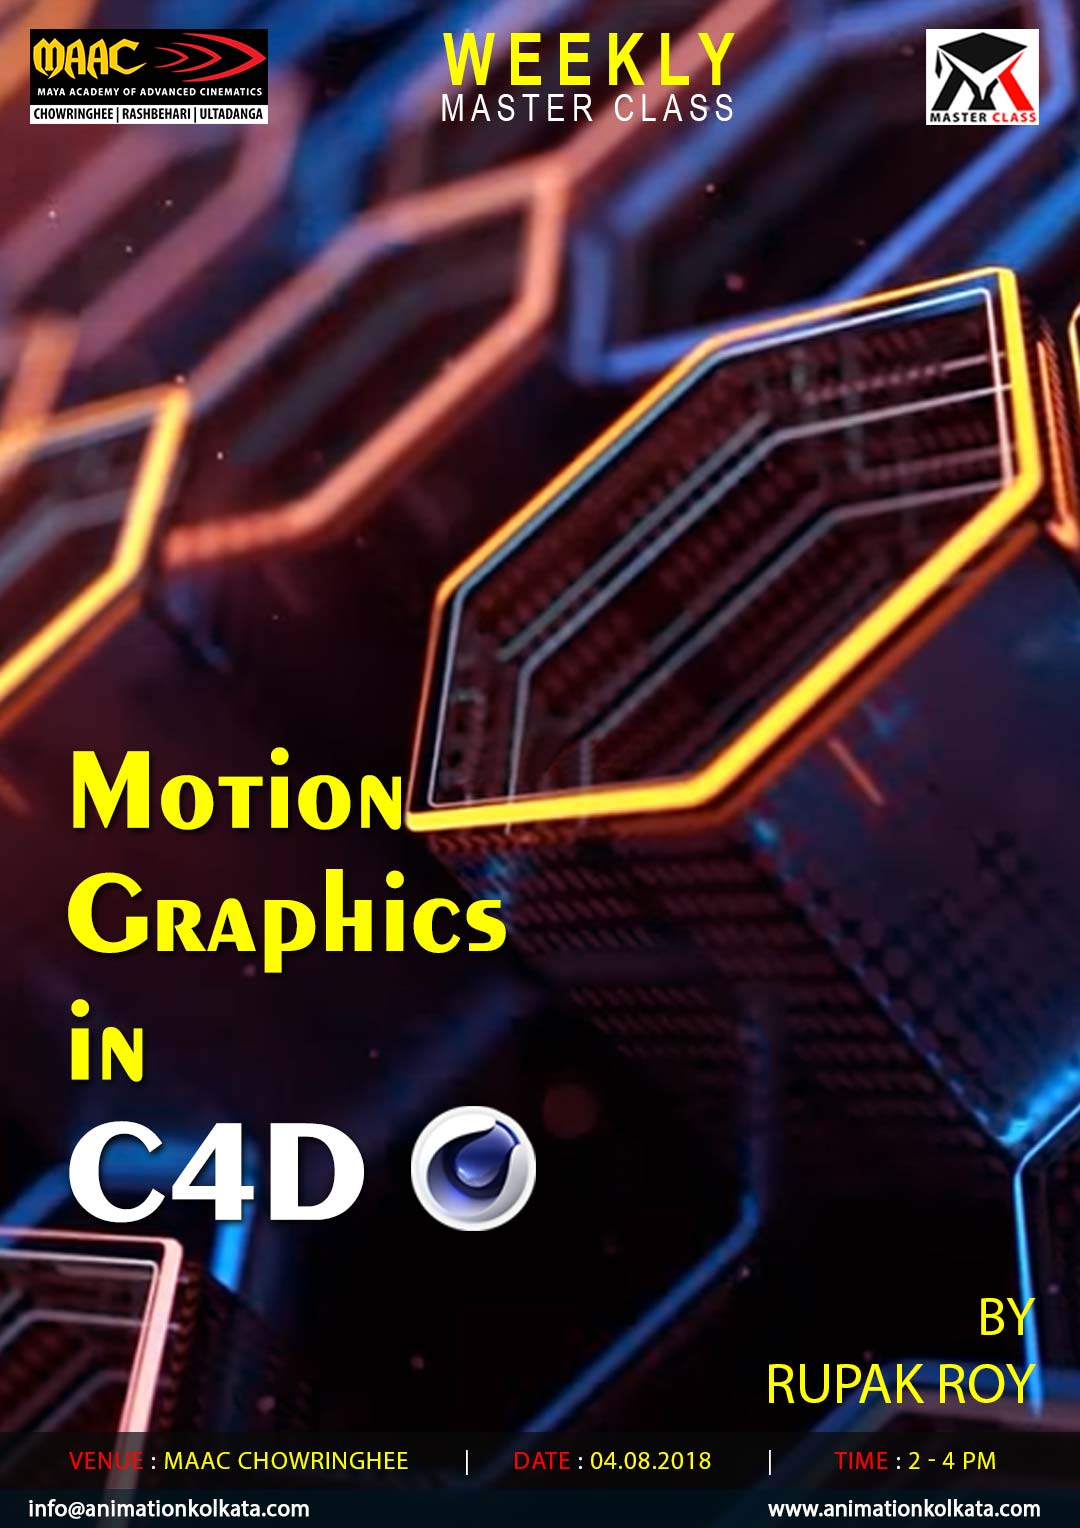 Weekly Master Class on Motion Graphics in C4D